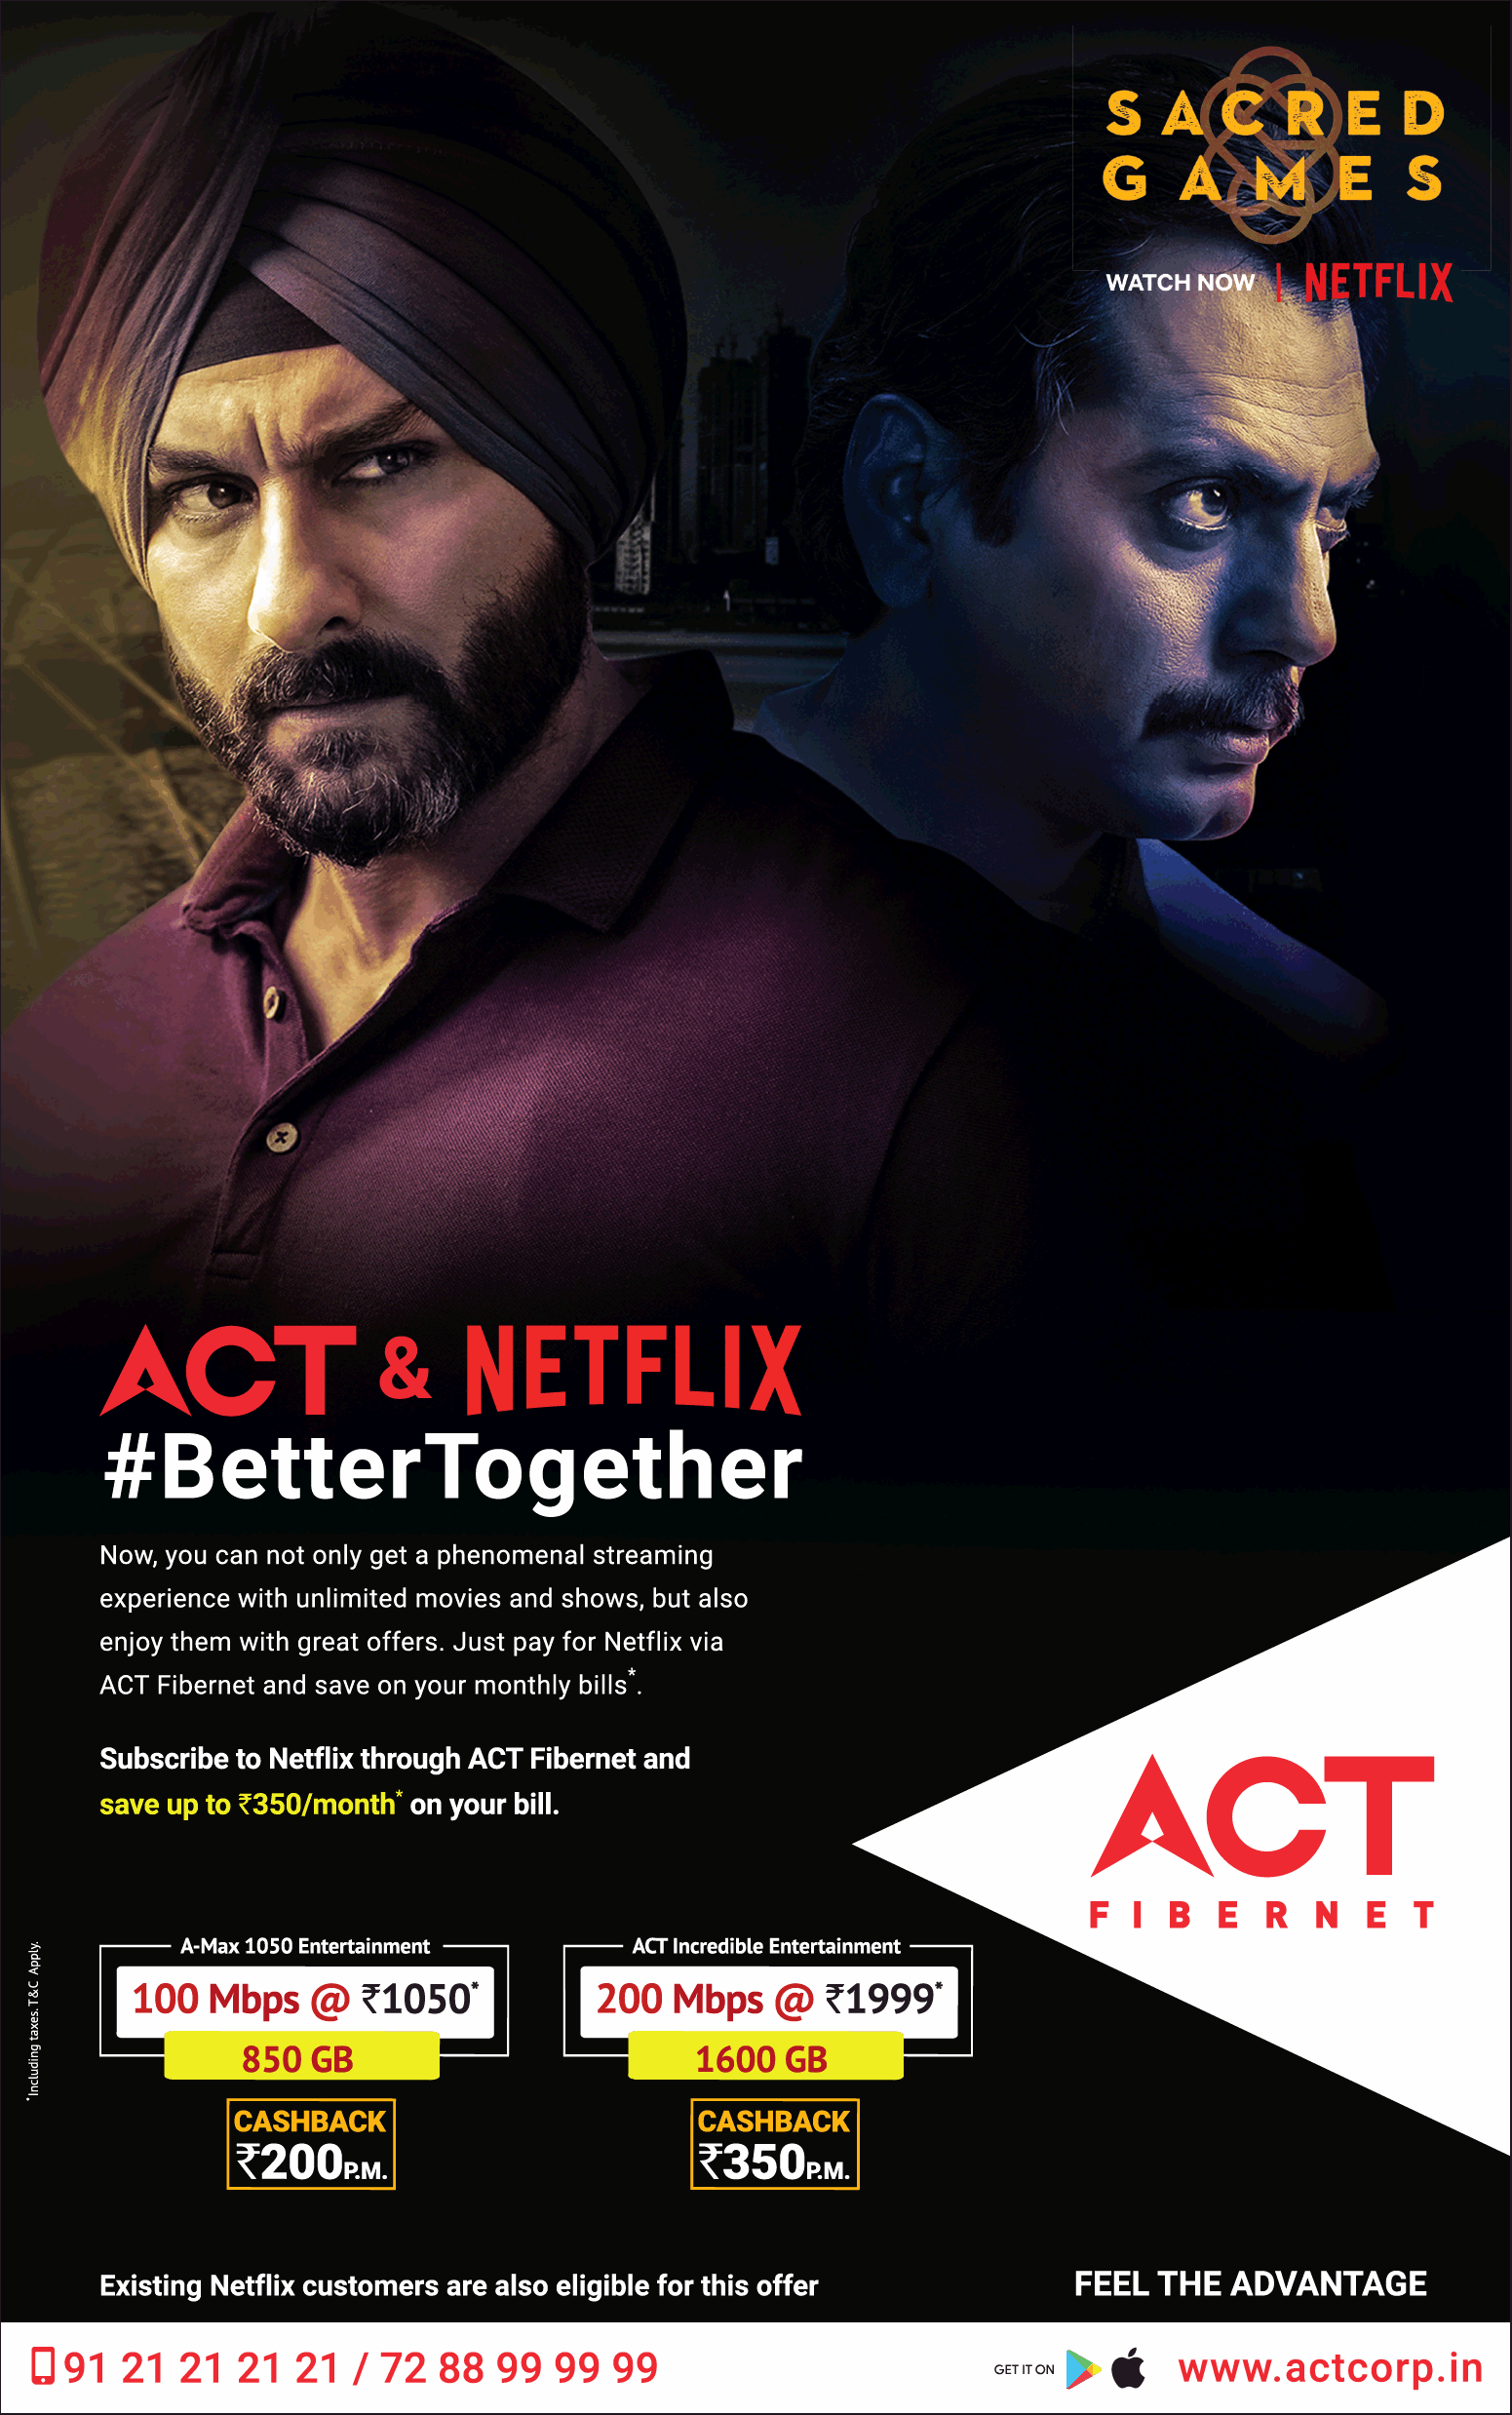 act-fibernet-act-and-netflix-better-together-ad-times-of-india-hyderabad-22-03-2019.png